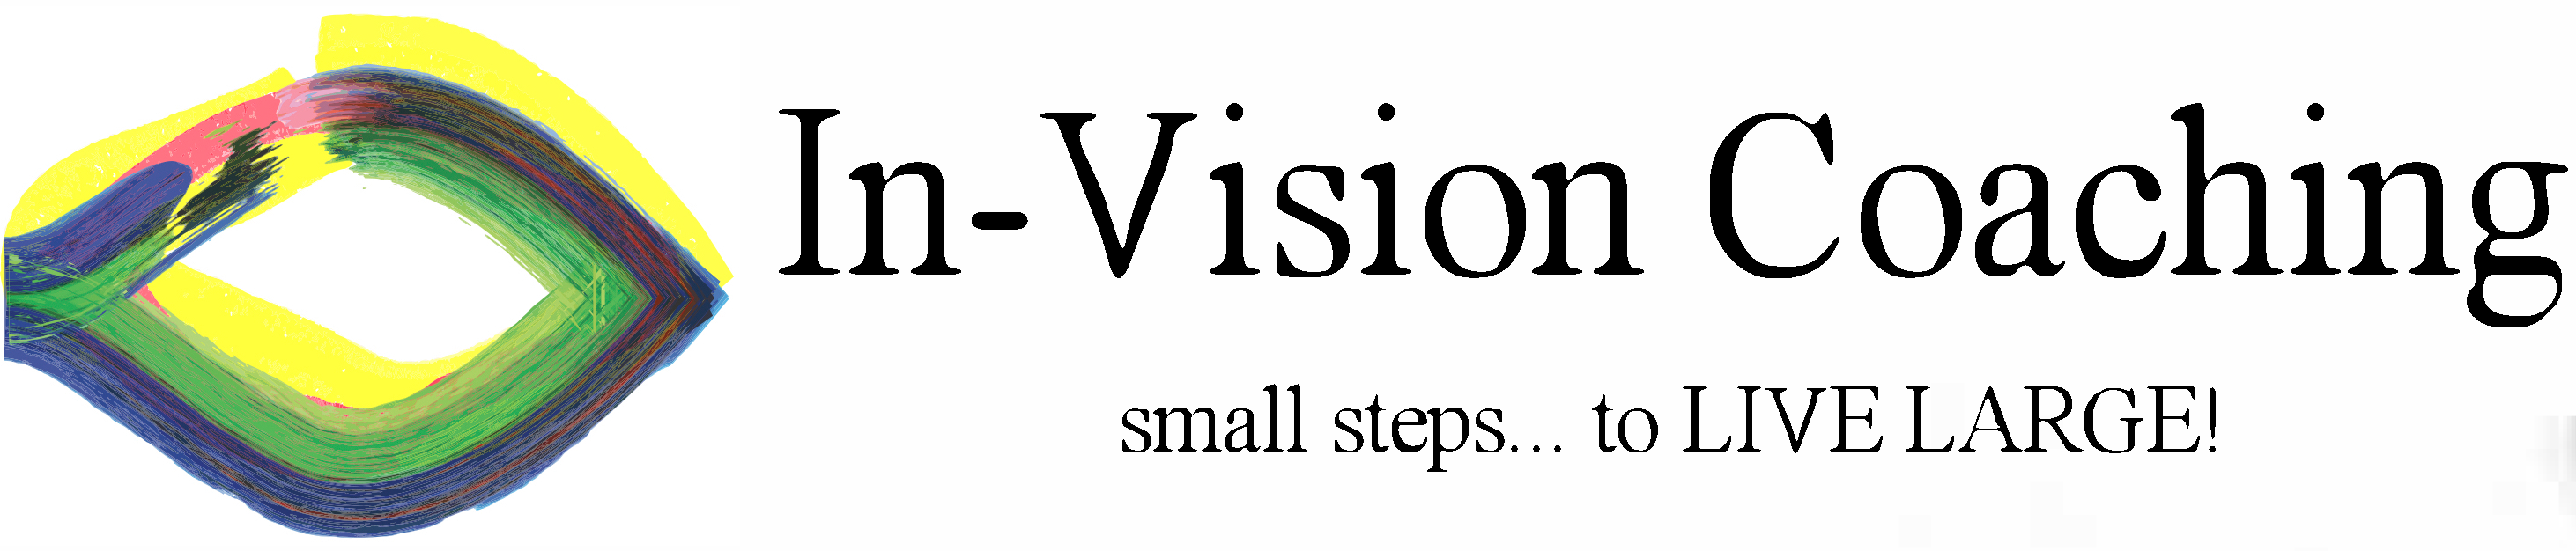 In-Vision Coaching